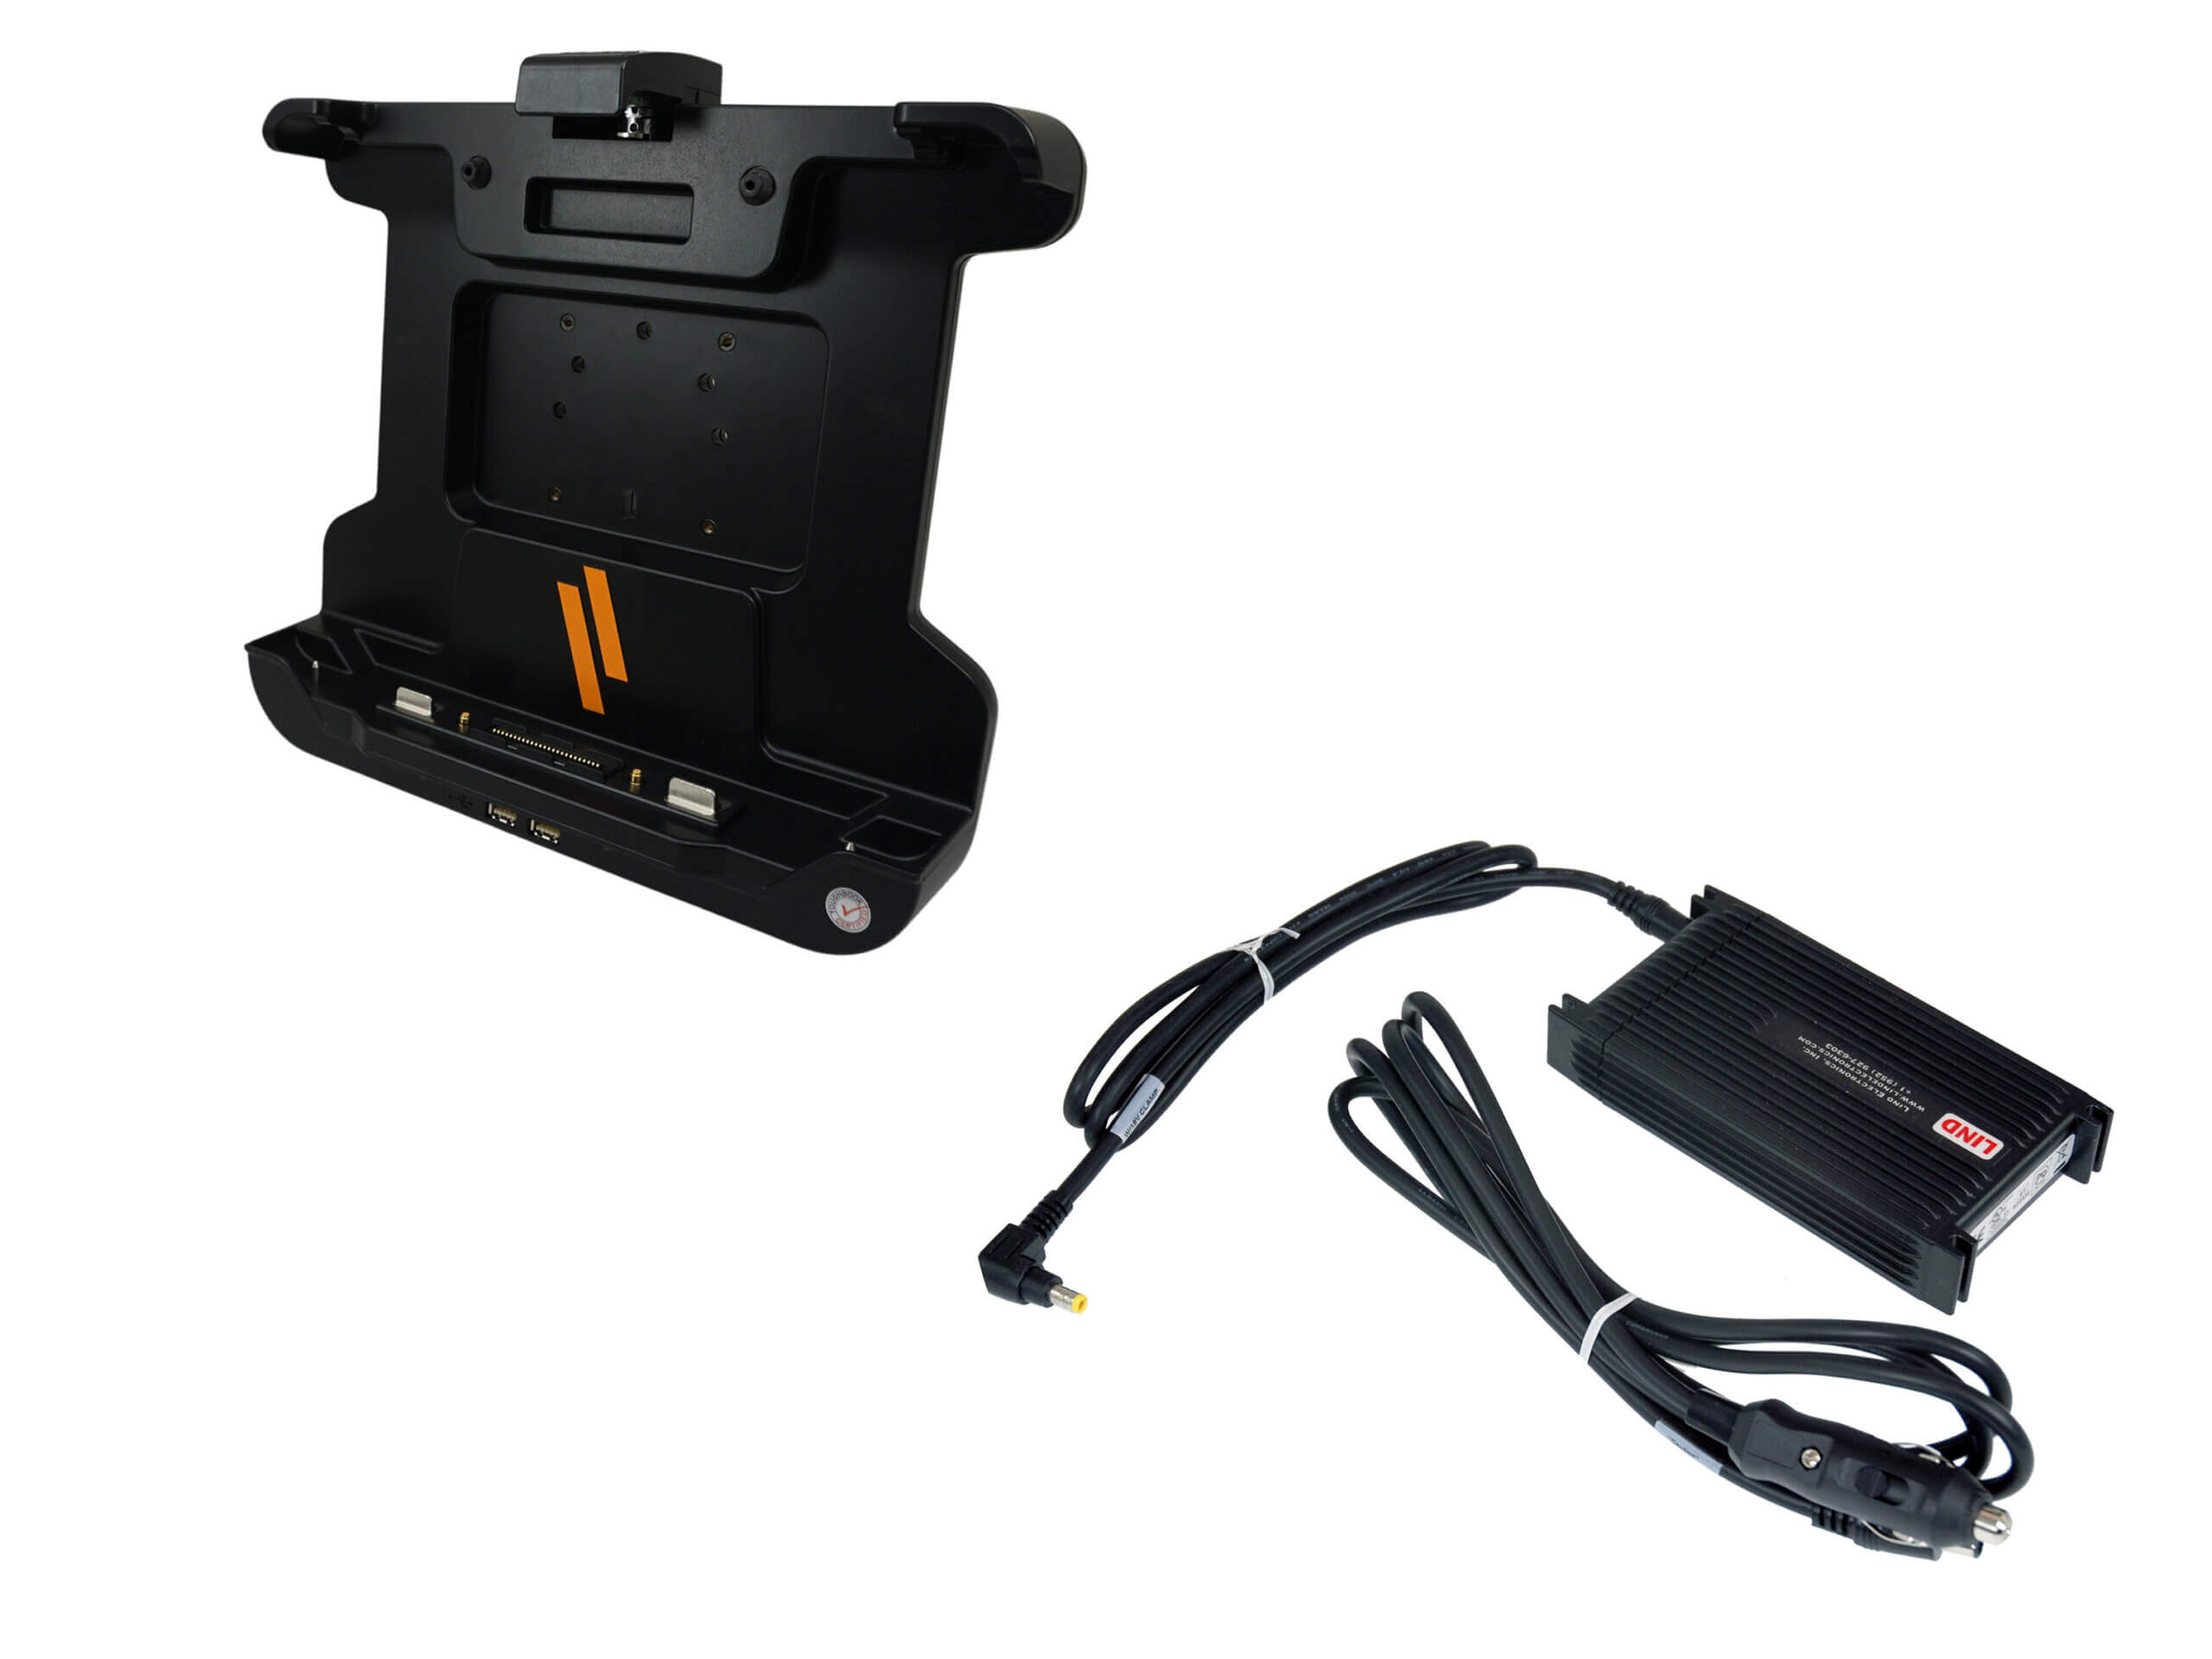 Docking Station For Panasonic TOUGHBOOK 33 Tablet with Standard Port Replication & Dual Pass-Thru Antenna Connections & LIND Power Supply